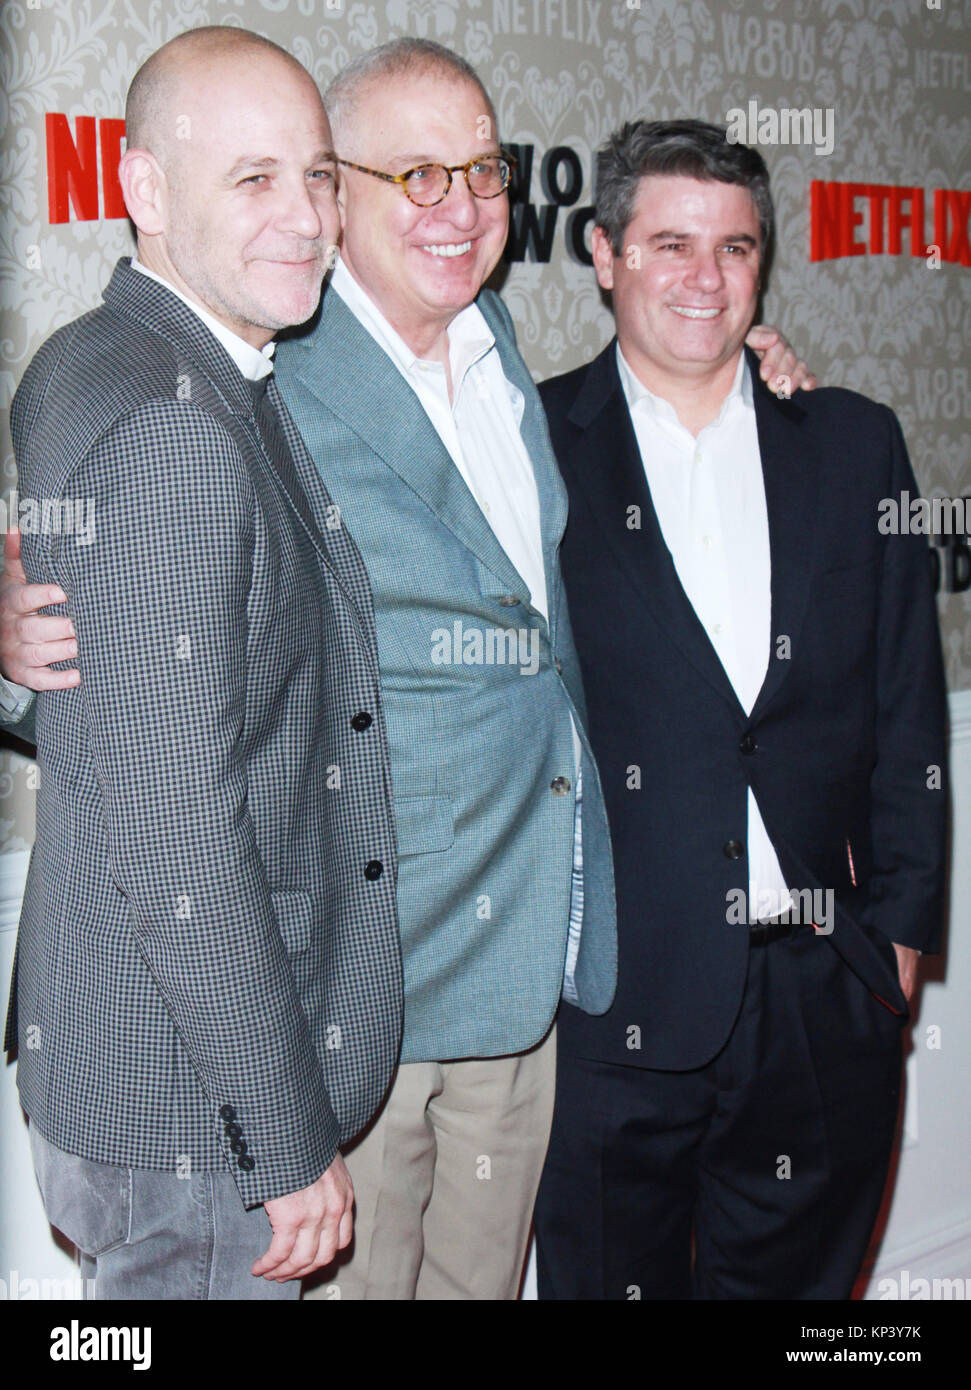 New York, NY, USA. 12th Dec, 2017. Peter Friedlander, Errol Morris, Adam Del Leo at the Netflix premiere of Wormwood at The Campbell in New York City on December 12, 2017. Credit: Rw/Media Punch/Alamy Live News Stock Photo